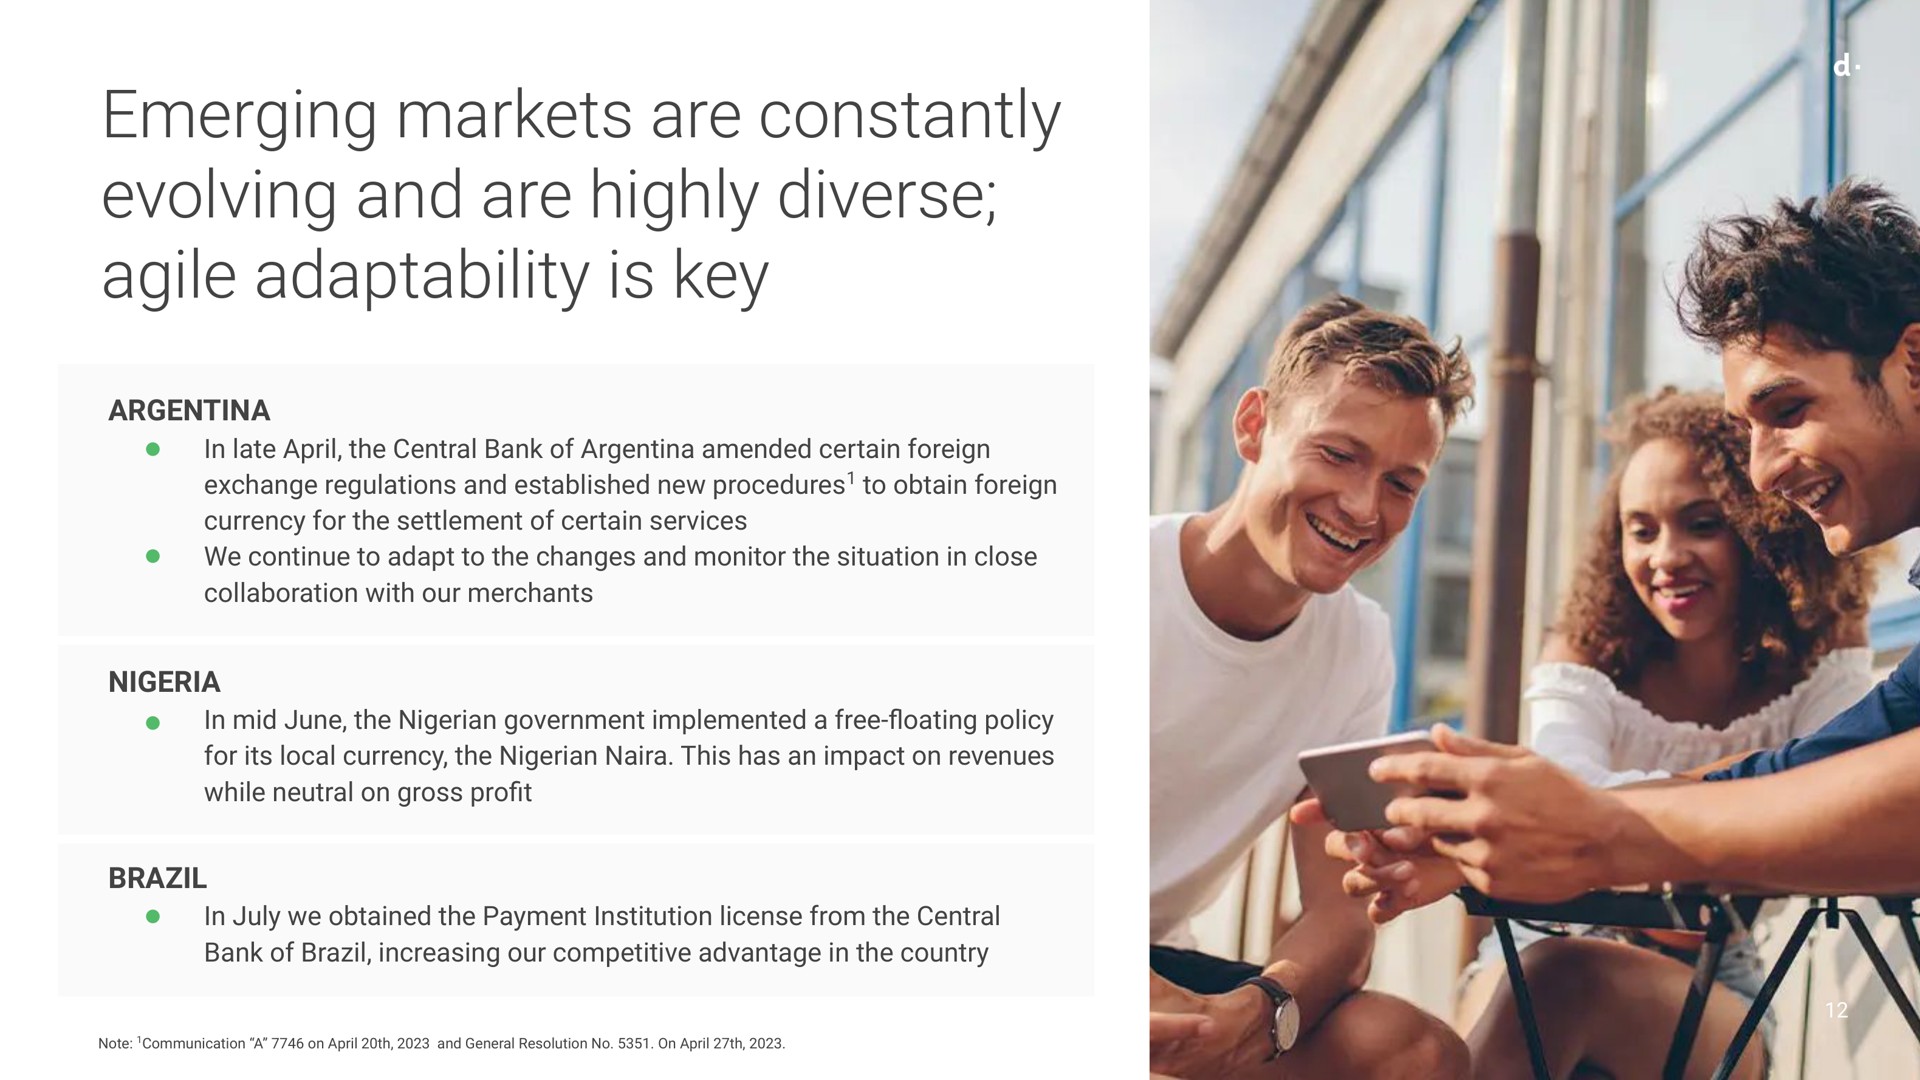 emerging markets are constantly evolving and are highly diverse agile adaptability is key | dLocal